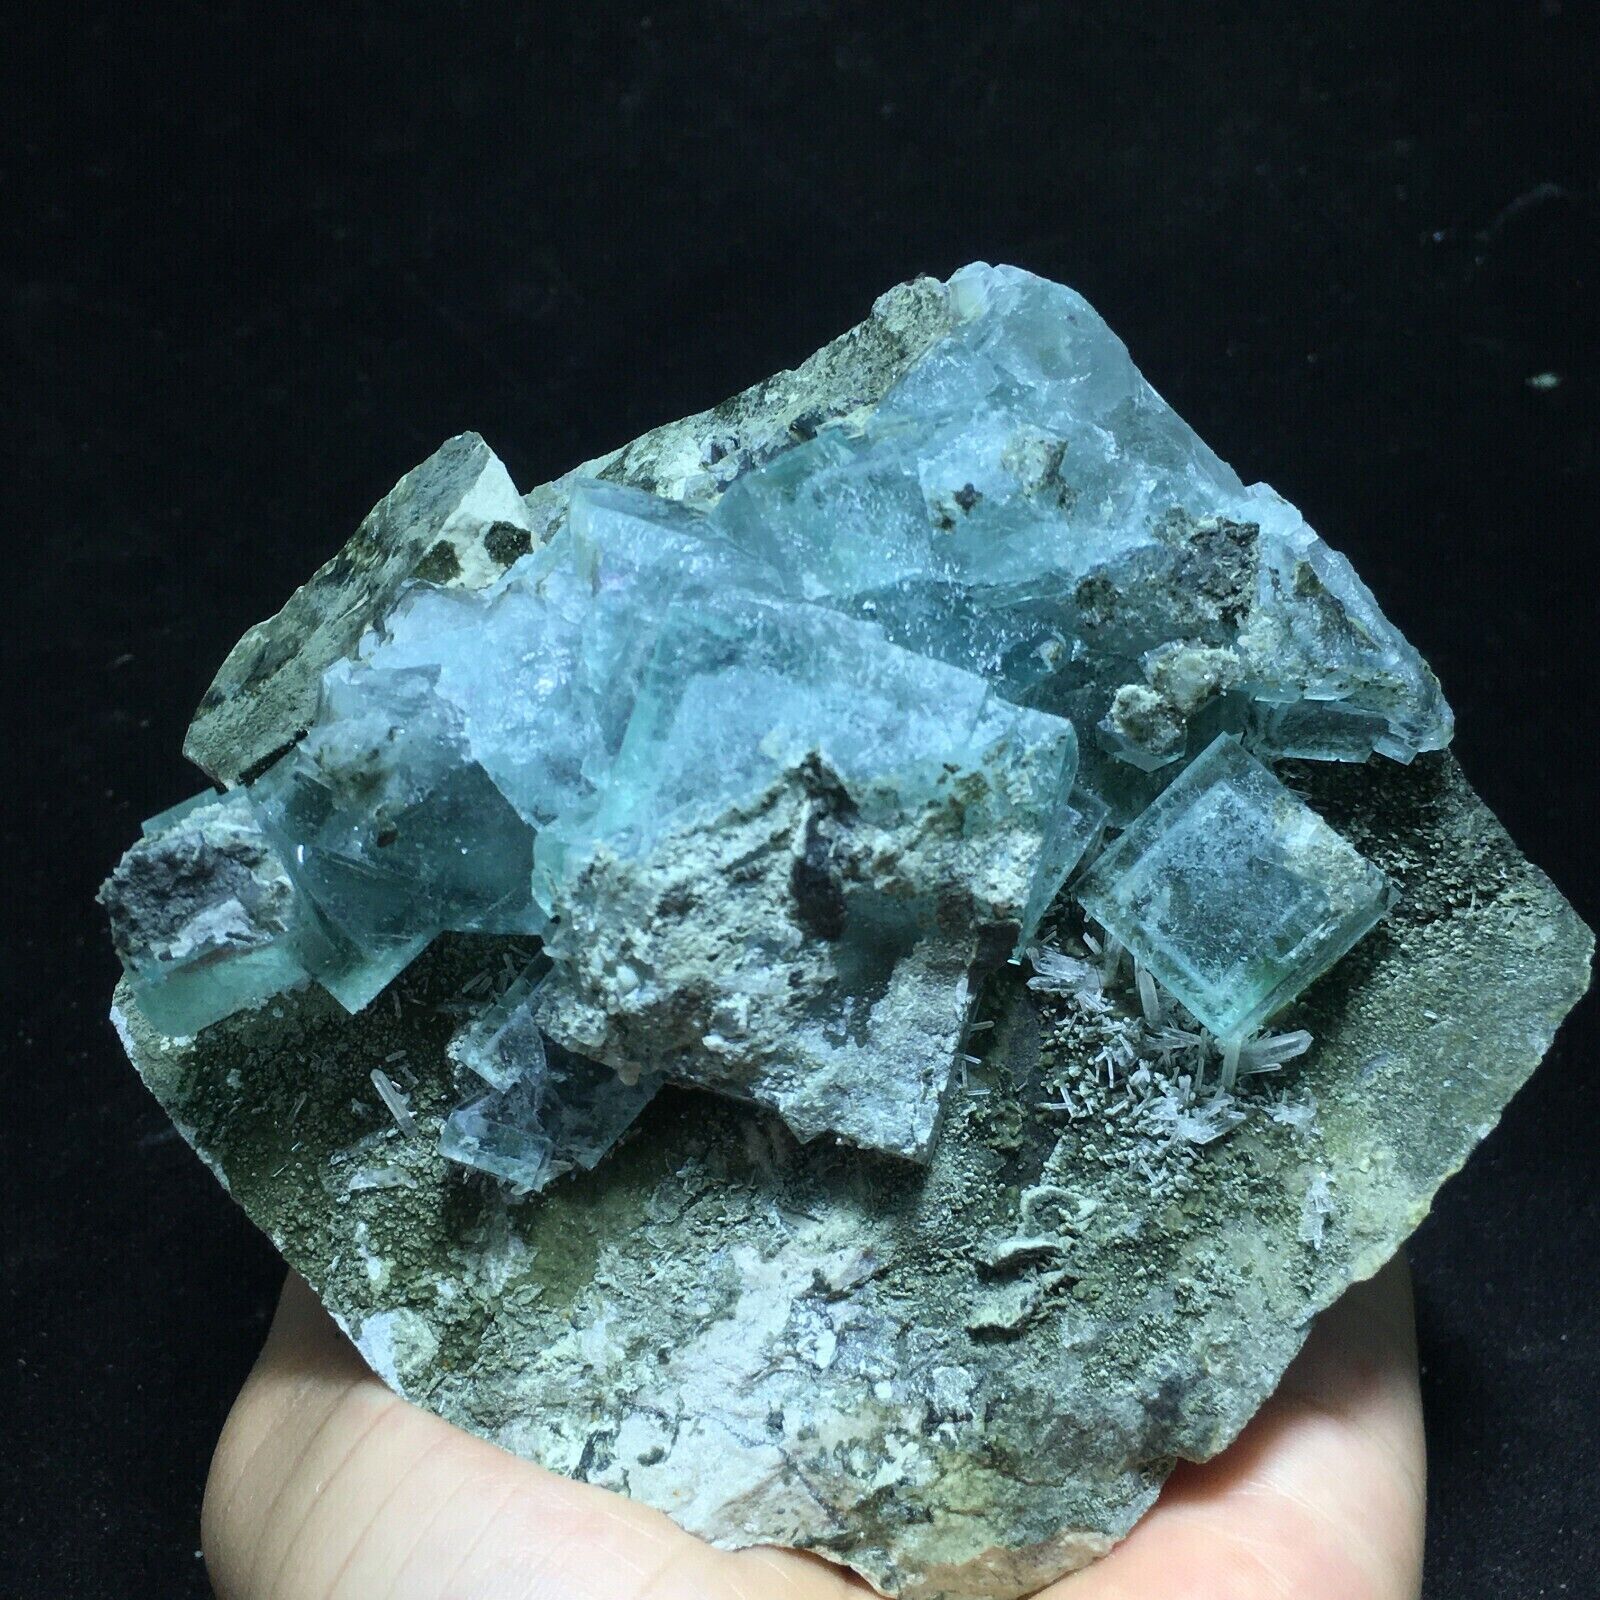 600g Natural Super Transparent Vitreous Fluorite comes from Xianghualing, Huna